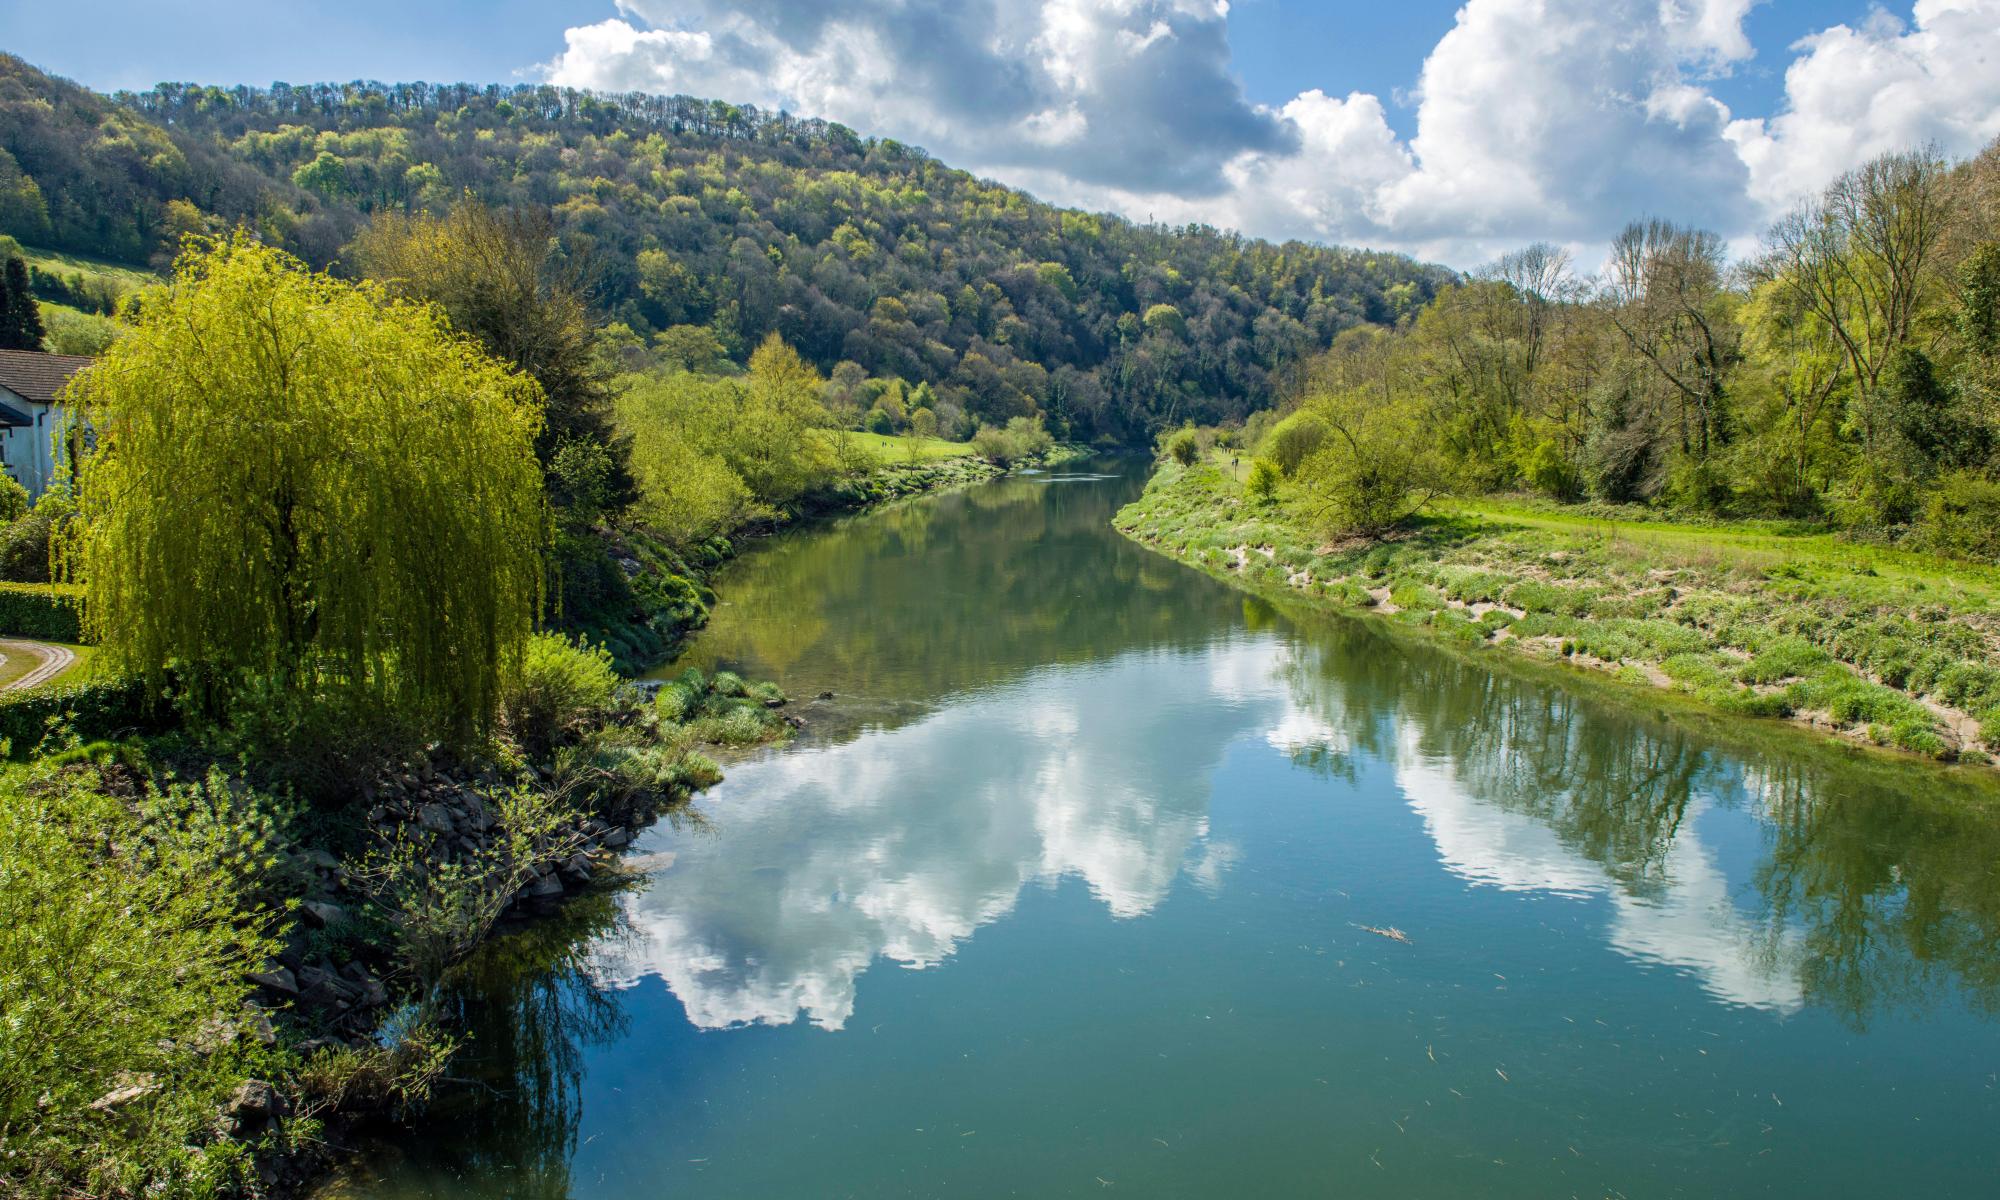 wwf shelved report exposing river wye pollution ‘to keep tesco happy’